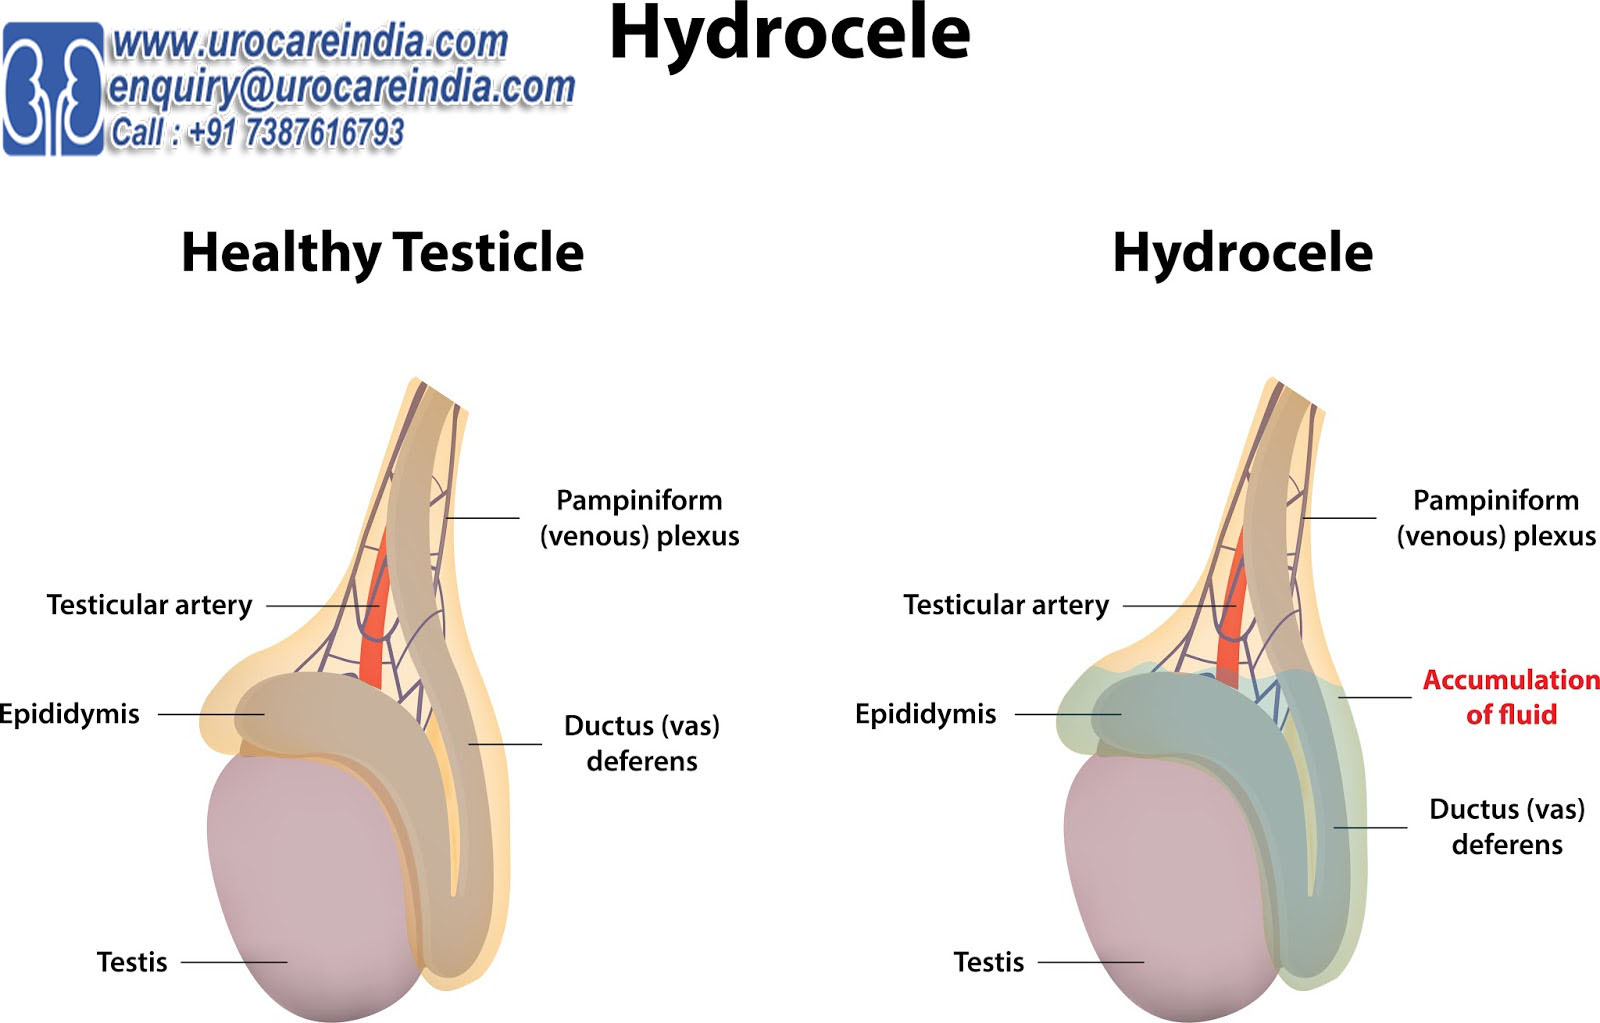 Hydrocele Operation in India At Affordable Cost- Hydrocele Operation